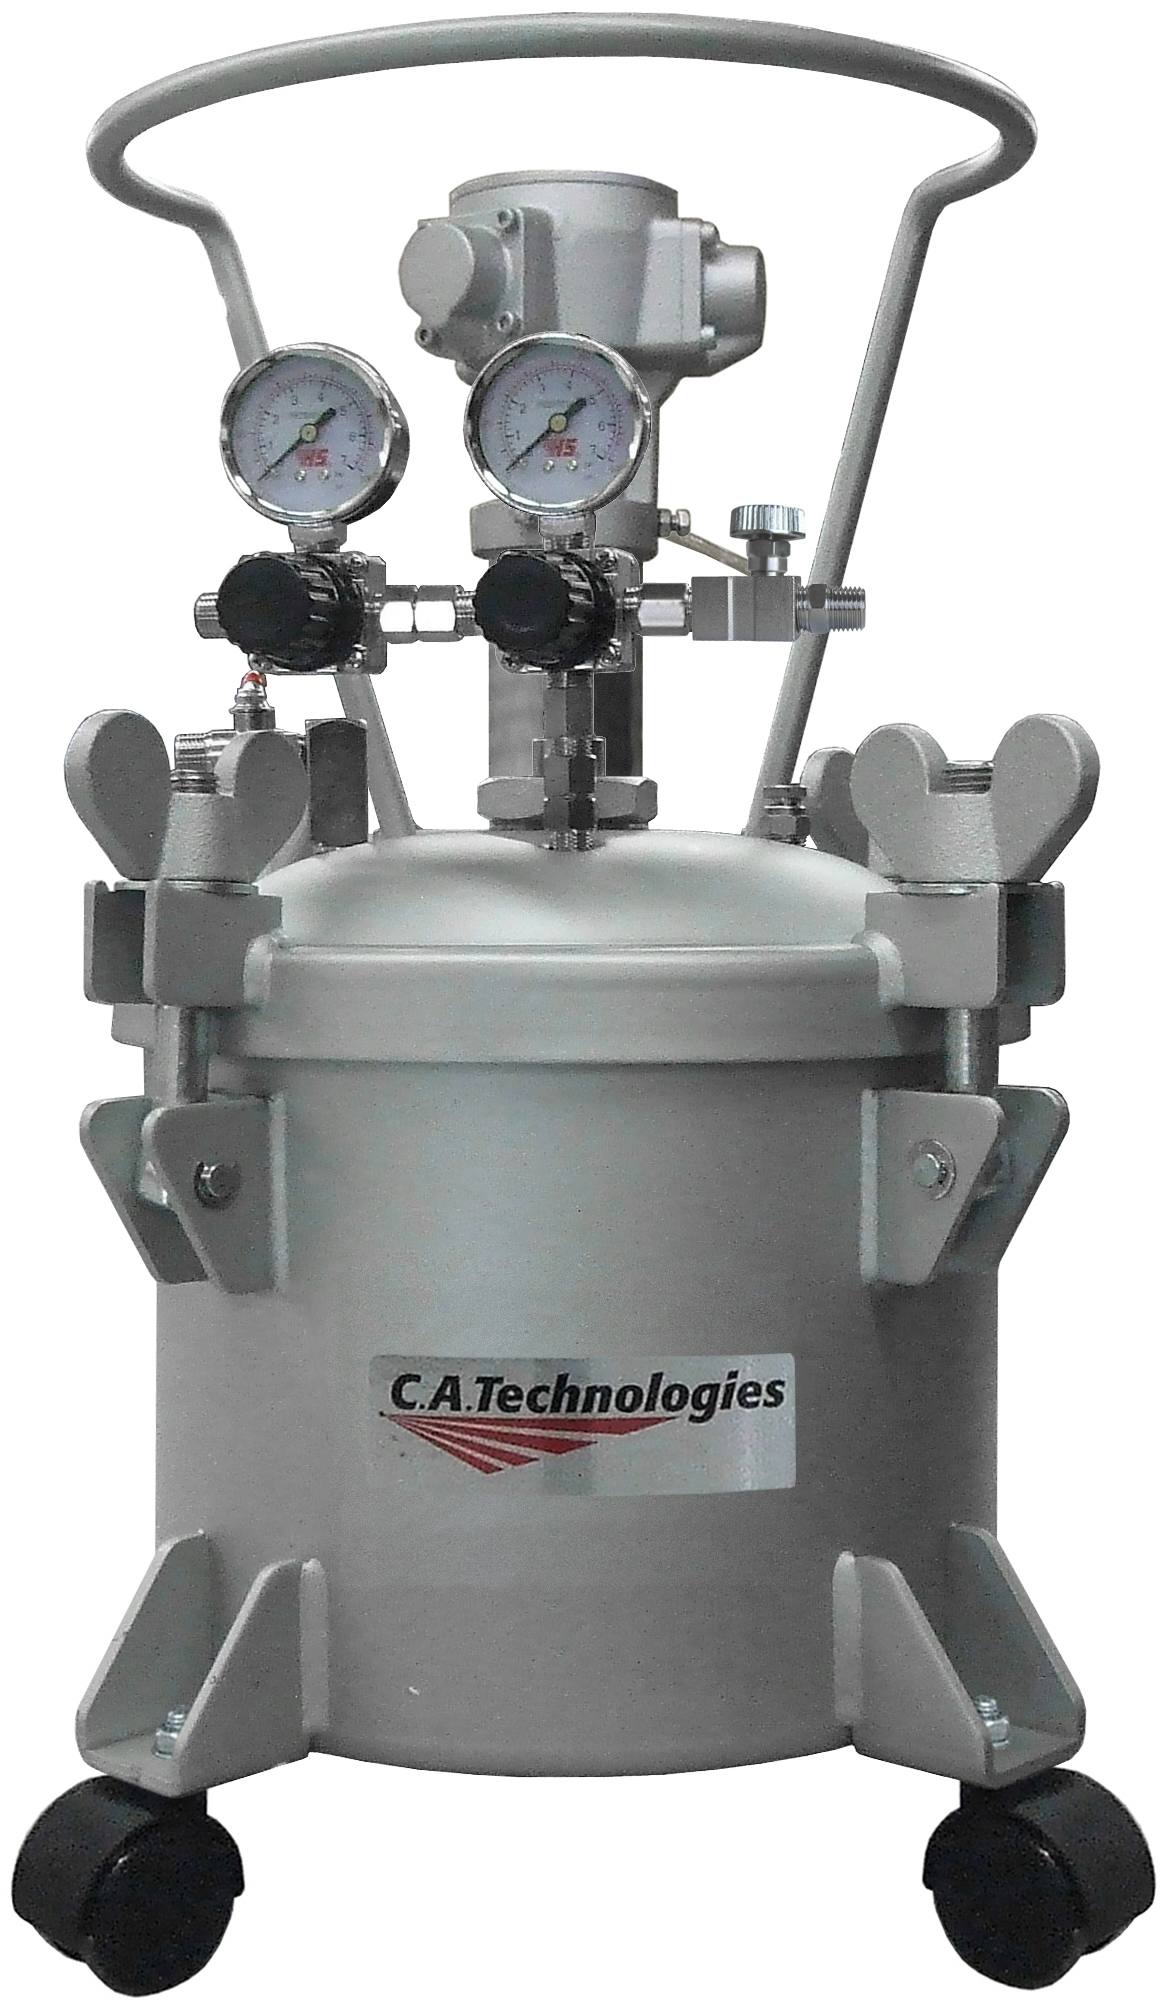 C.A Technologies CA91-560 PPS™ Series 2.0 H/O Pressure Cup